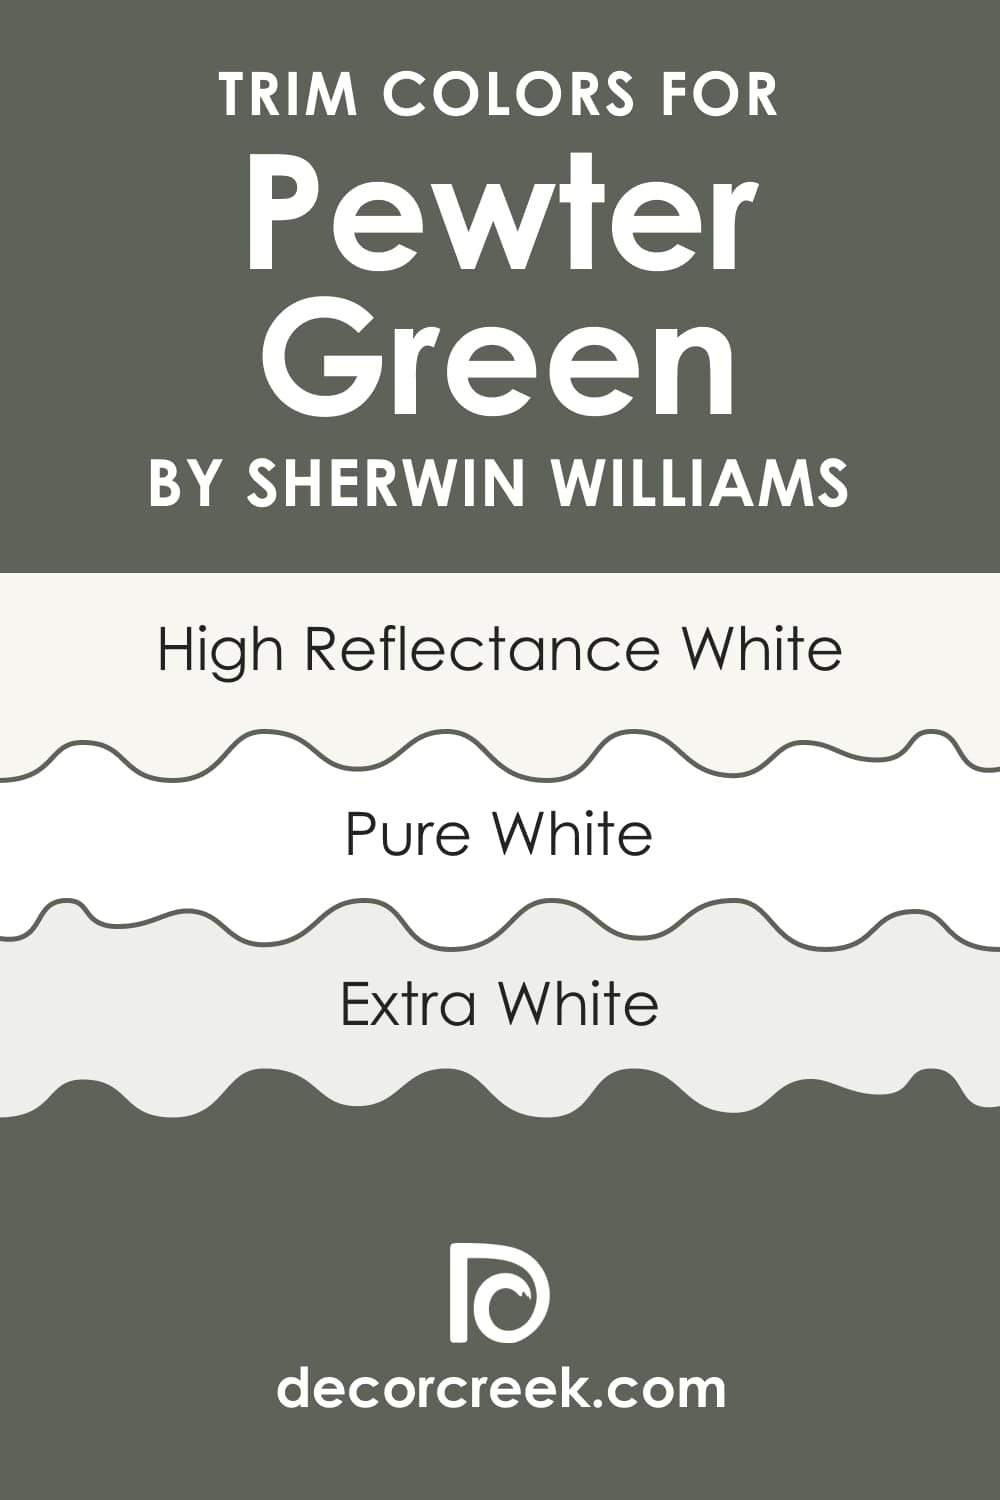 What Is the Best Trim Color For Pewter Green SW-6208?